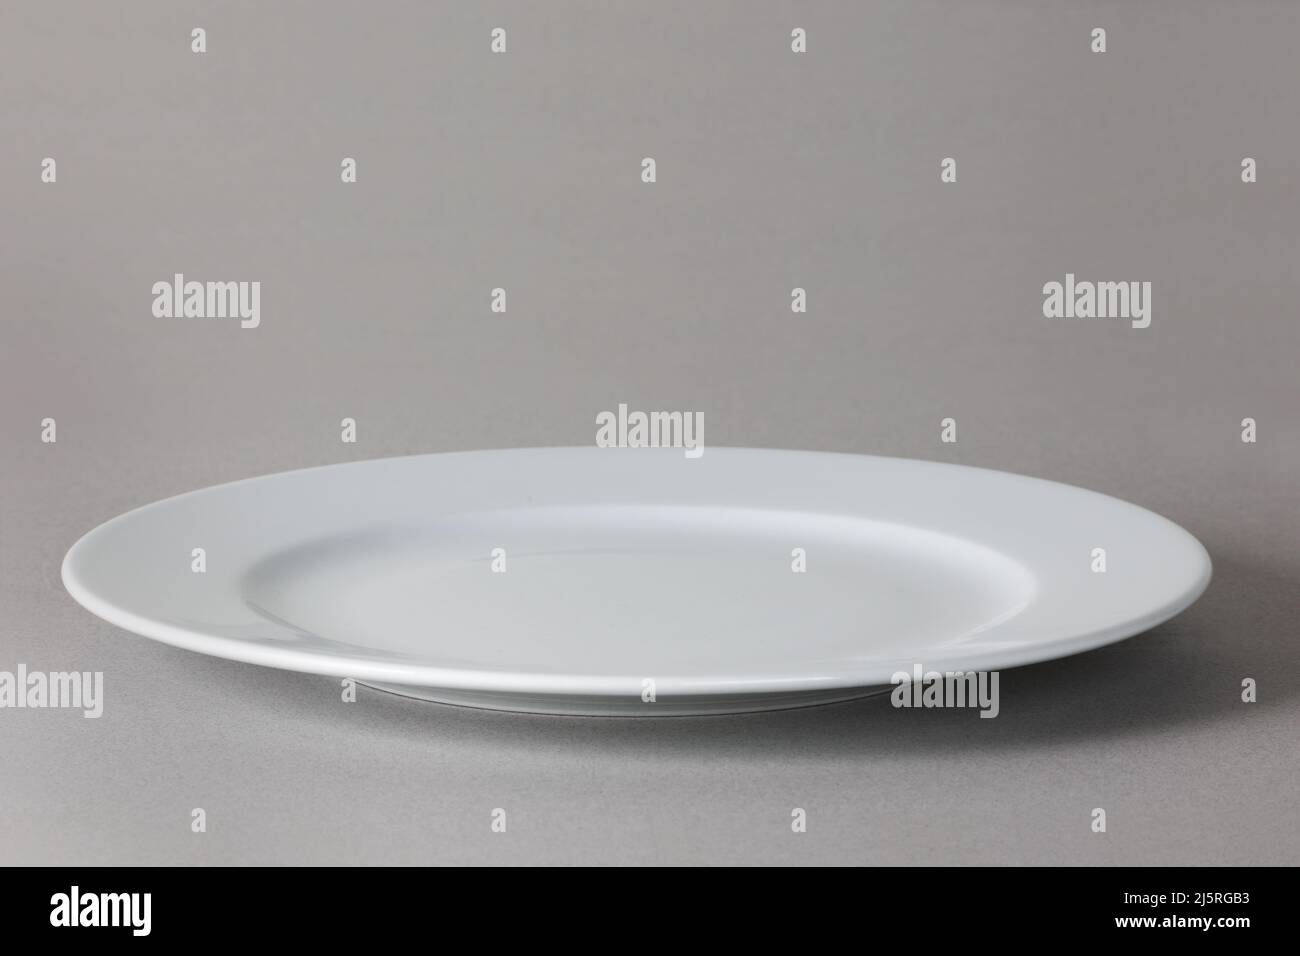 Flat front angle view of a white dinner plate on neutral background with shadow Stock Photo